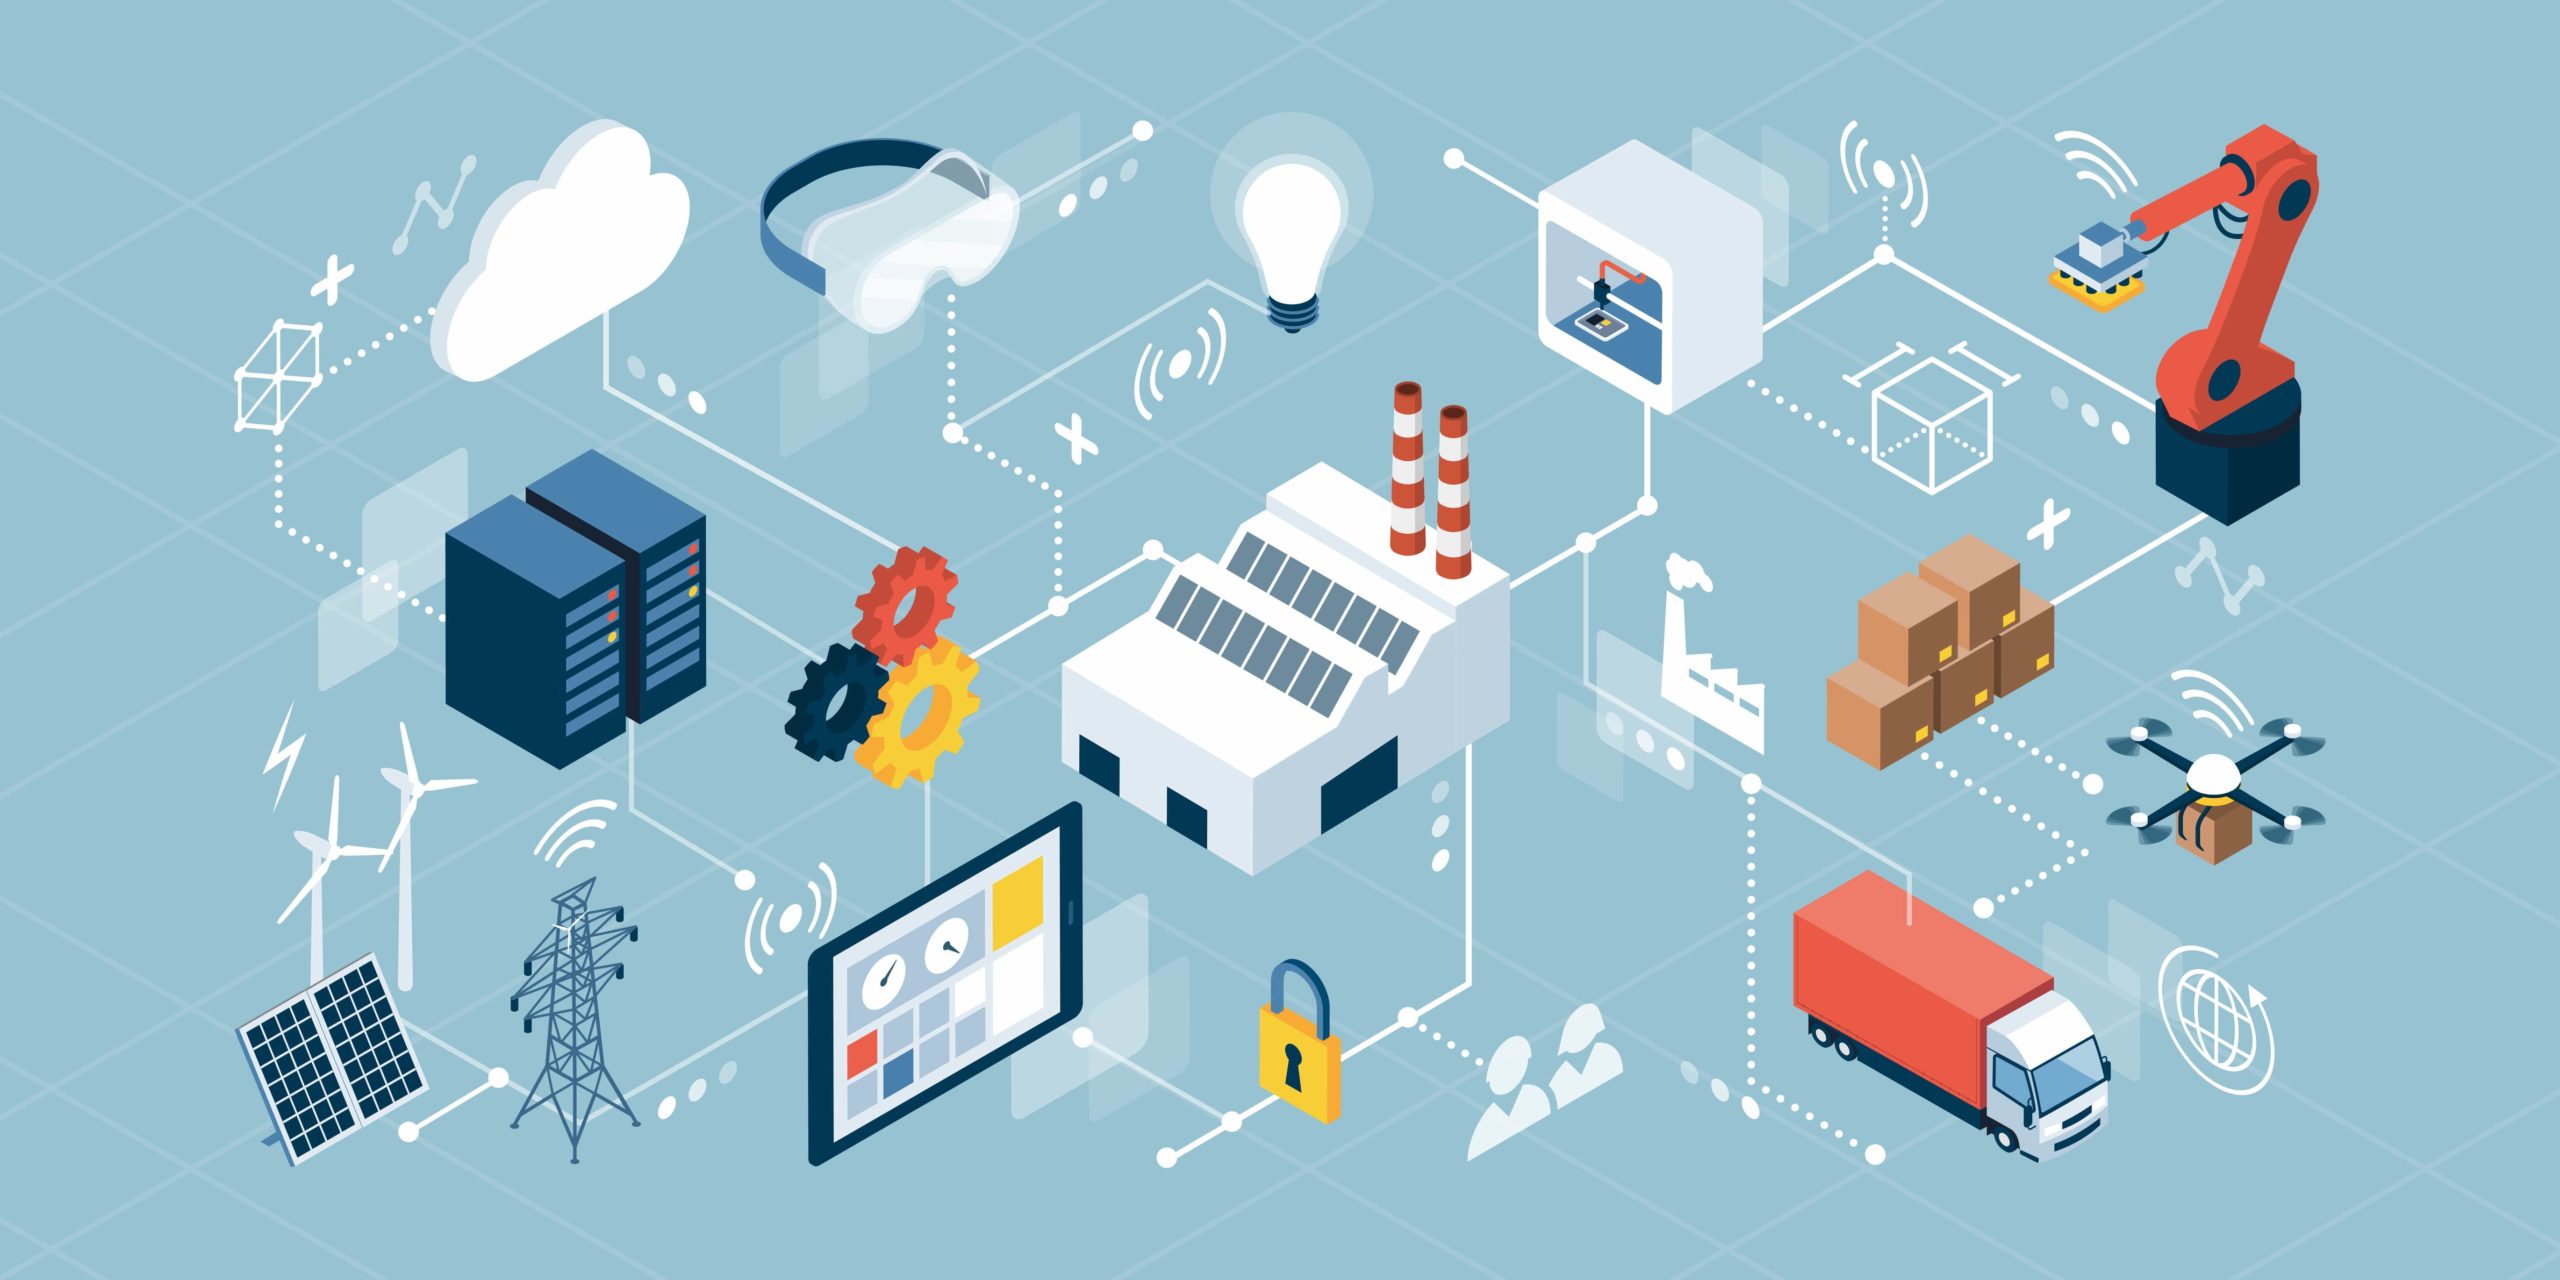 An overview of the systems involved in the Industrial Internet of Things (IIoT)